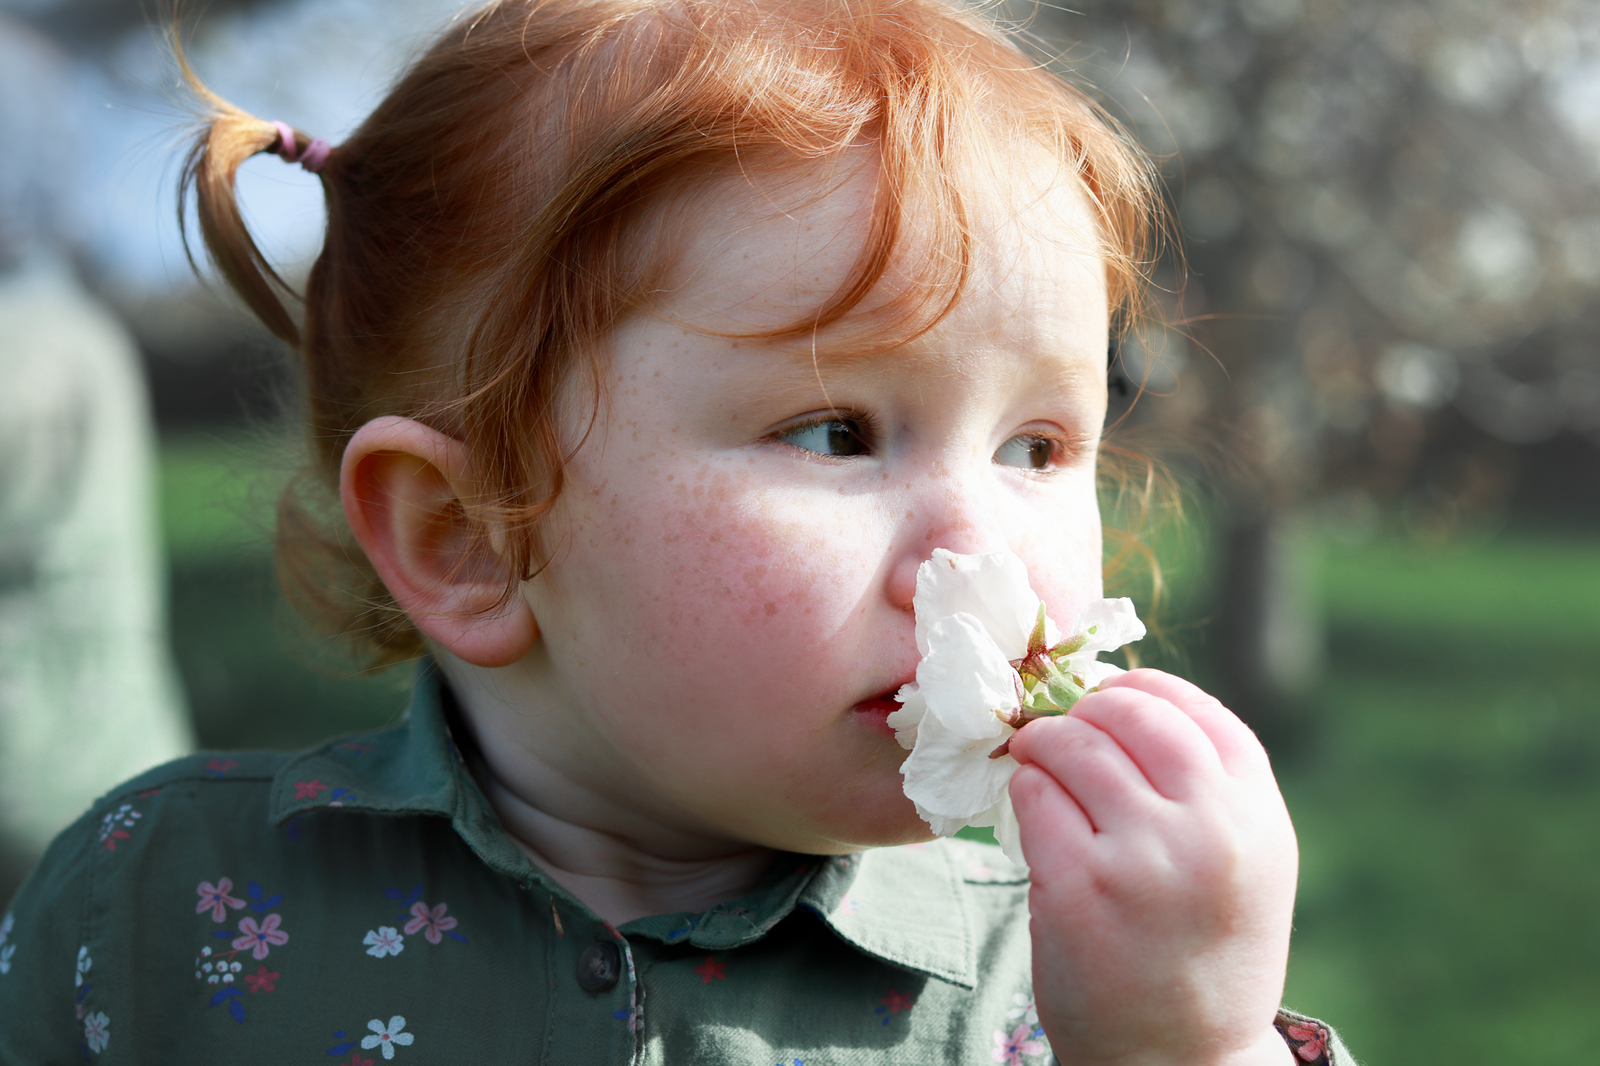 Little girl sniffs flowers during photography session